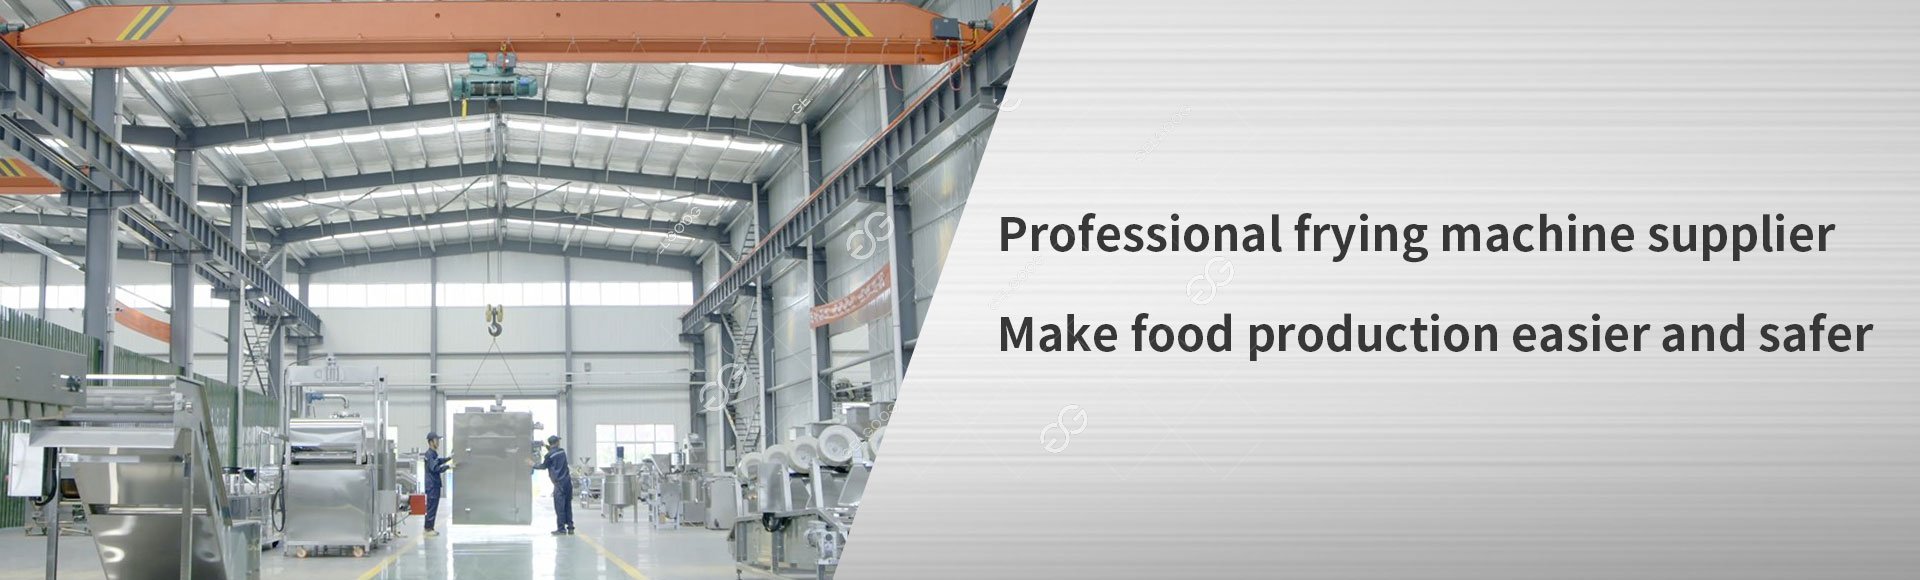 Automatic Frying Machine Supplier